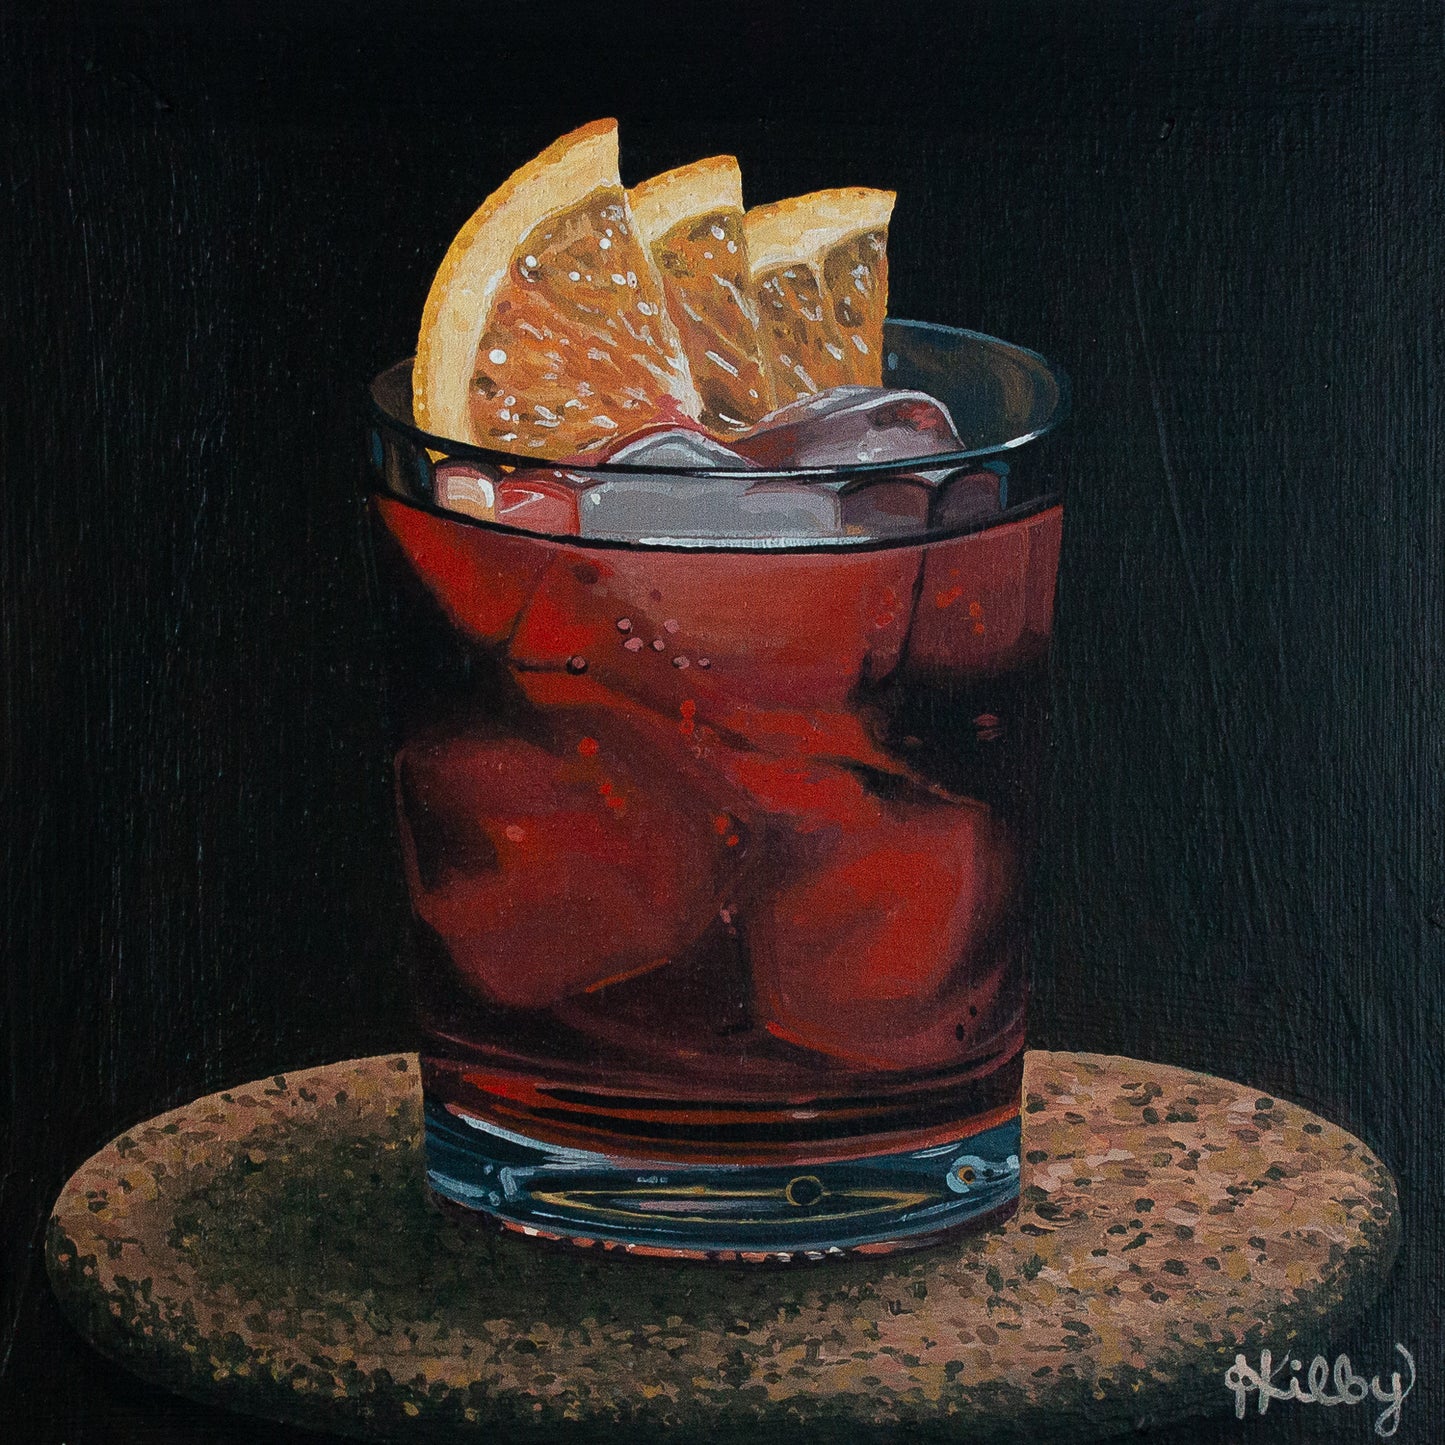 The original acrylic painting "Negroni" by Hannah Kilby from Hannah Michelle Studios.